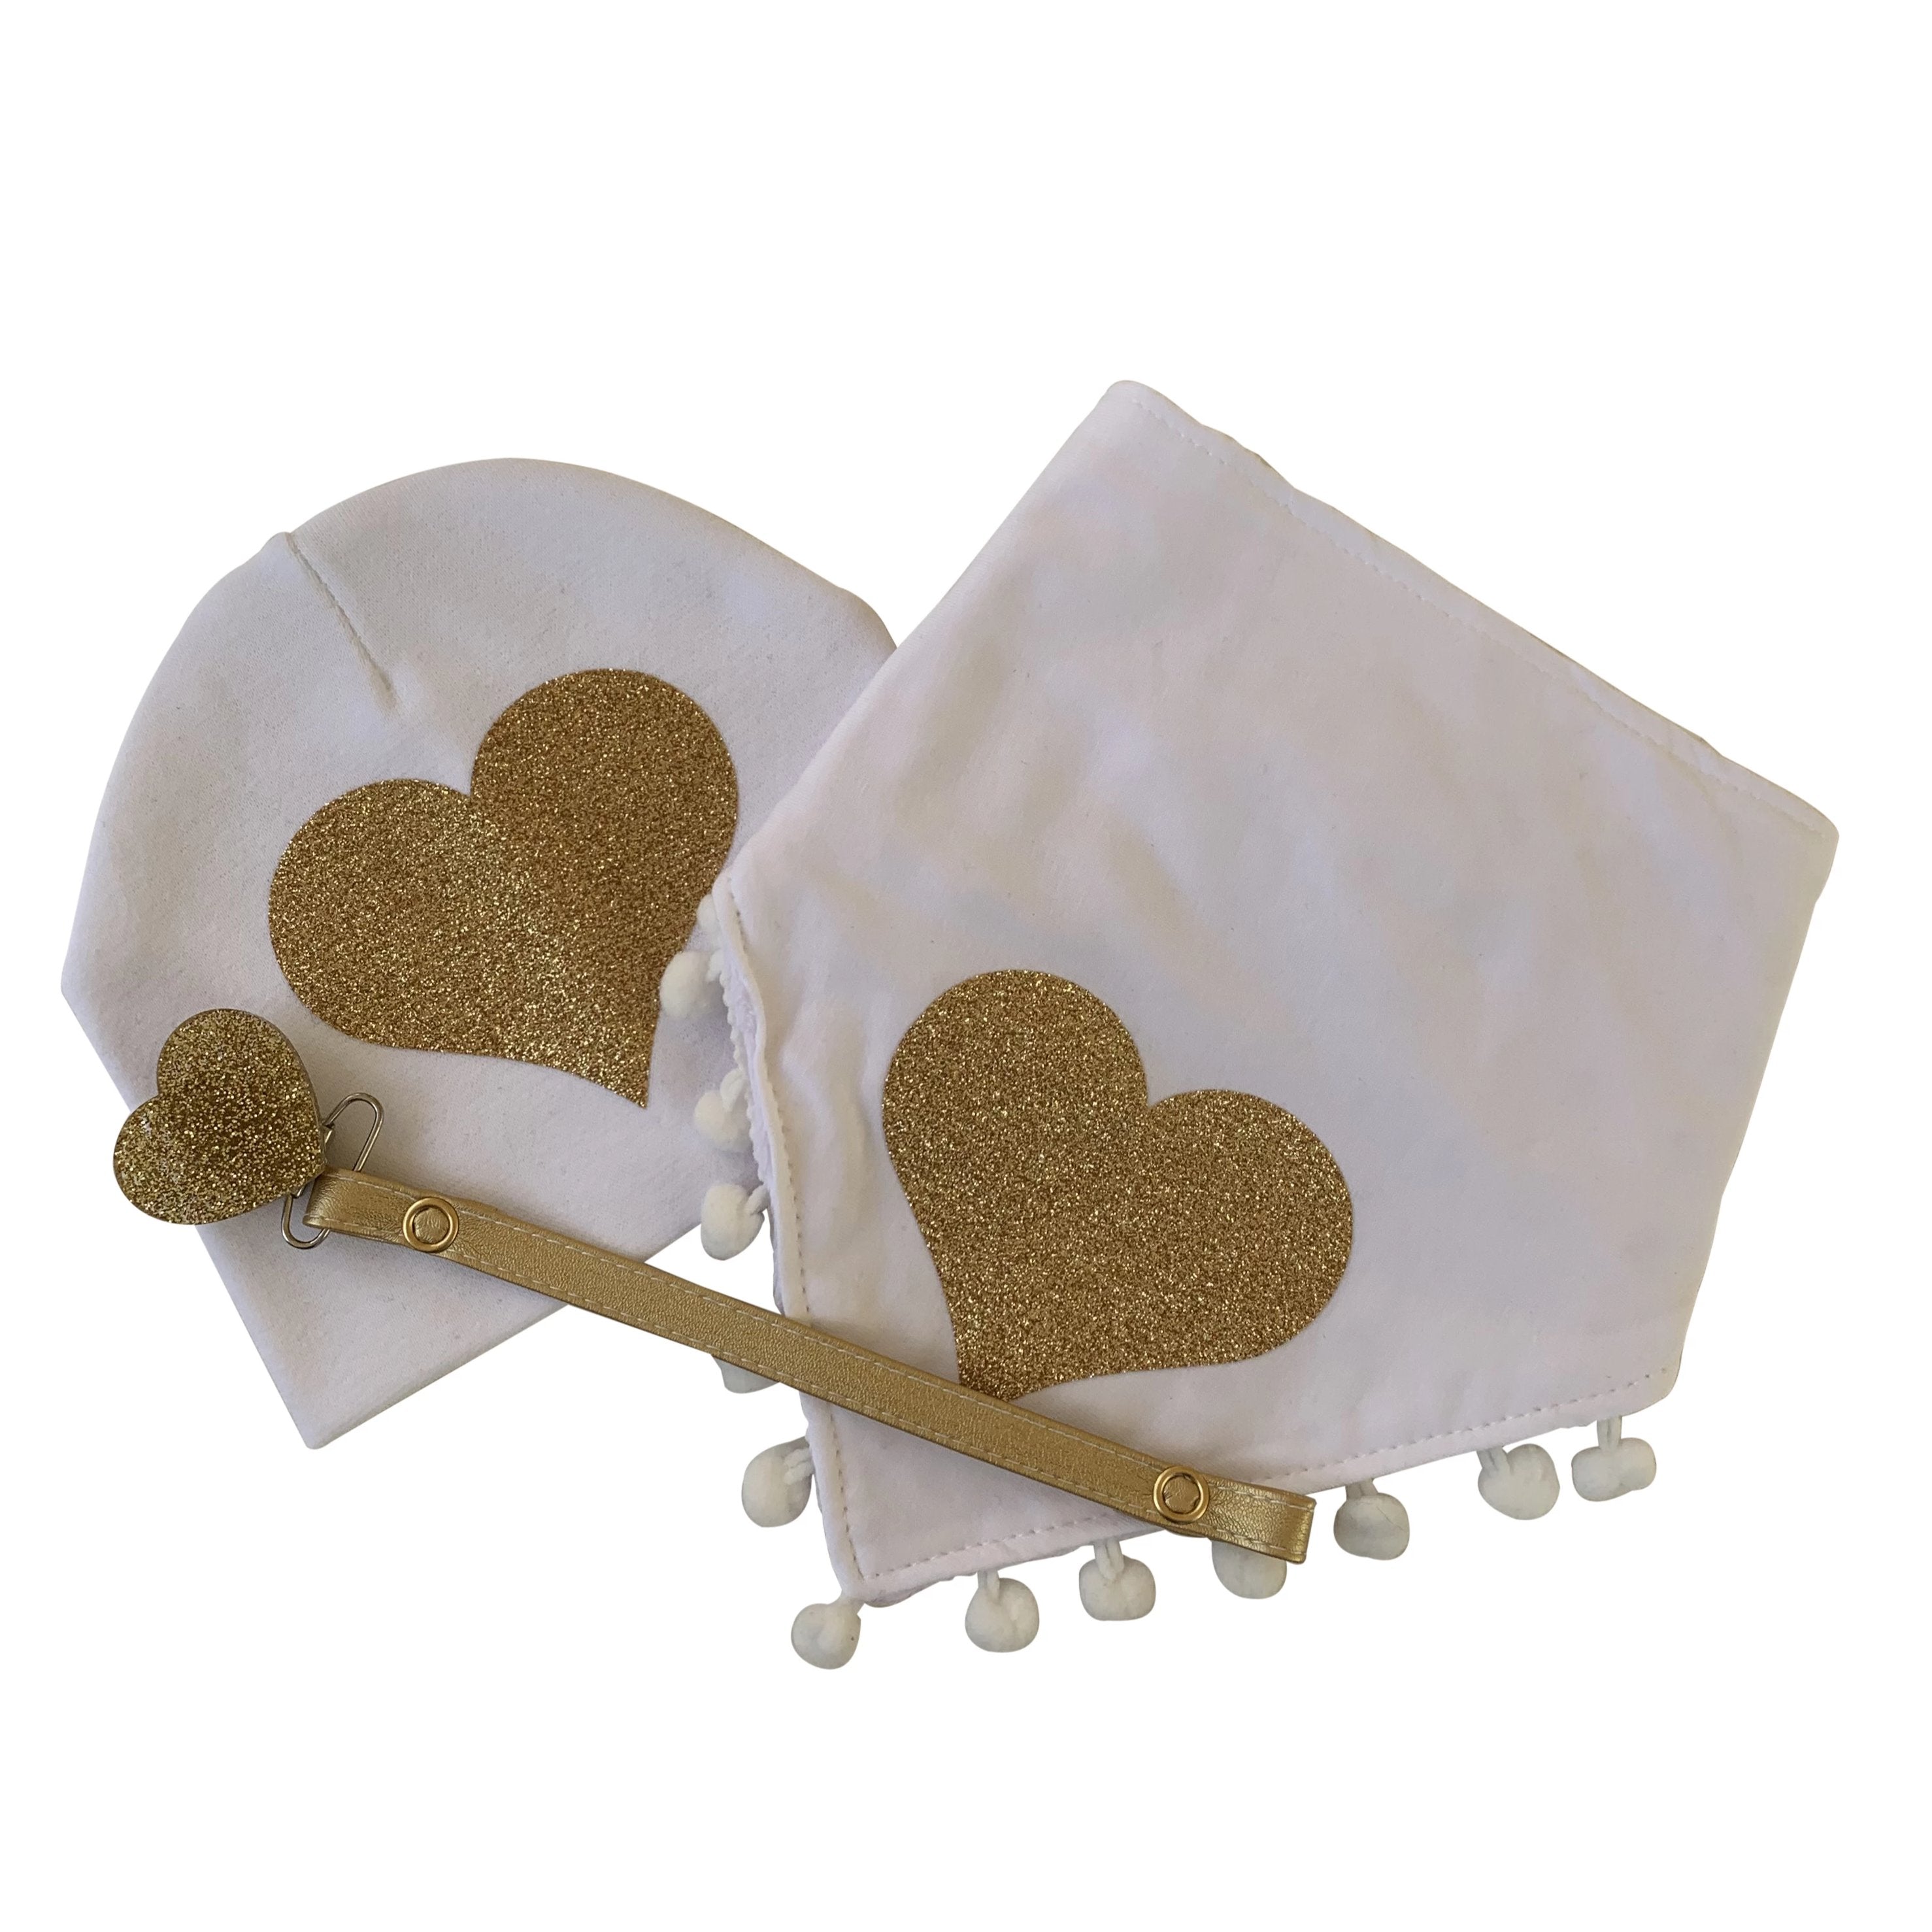 White with Gold sparkle heart bib, hat pacifier clip DELUXE GIFT SET